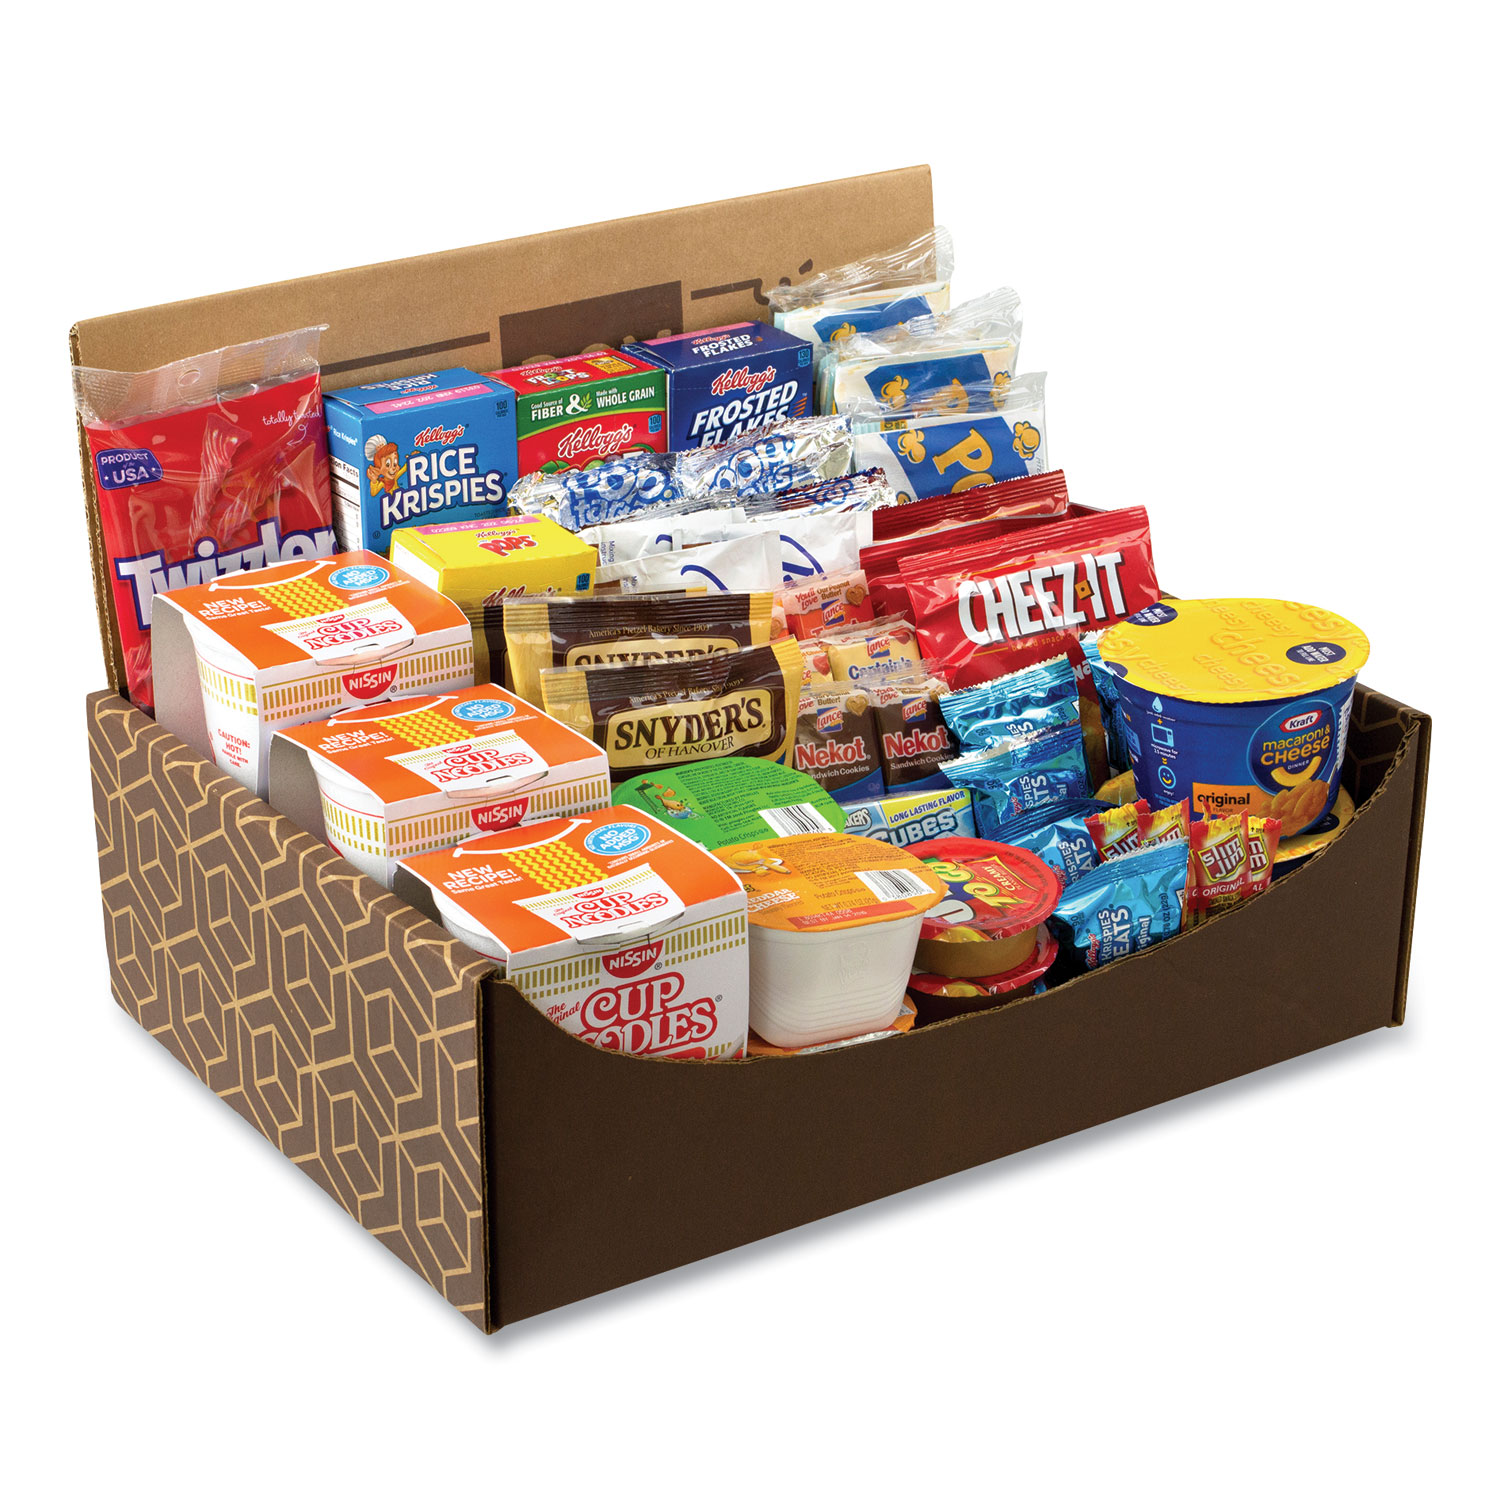  Snack Box Pros 70000014 Dorm Room Survival Snack Box, 55 Assorted Snacks, Free Delivery in 1-4 Business Days (GRR70000014) 